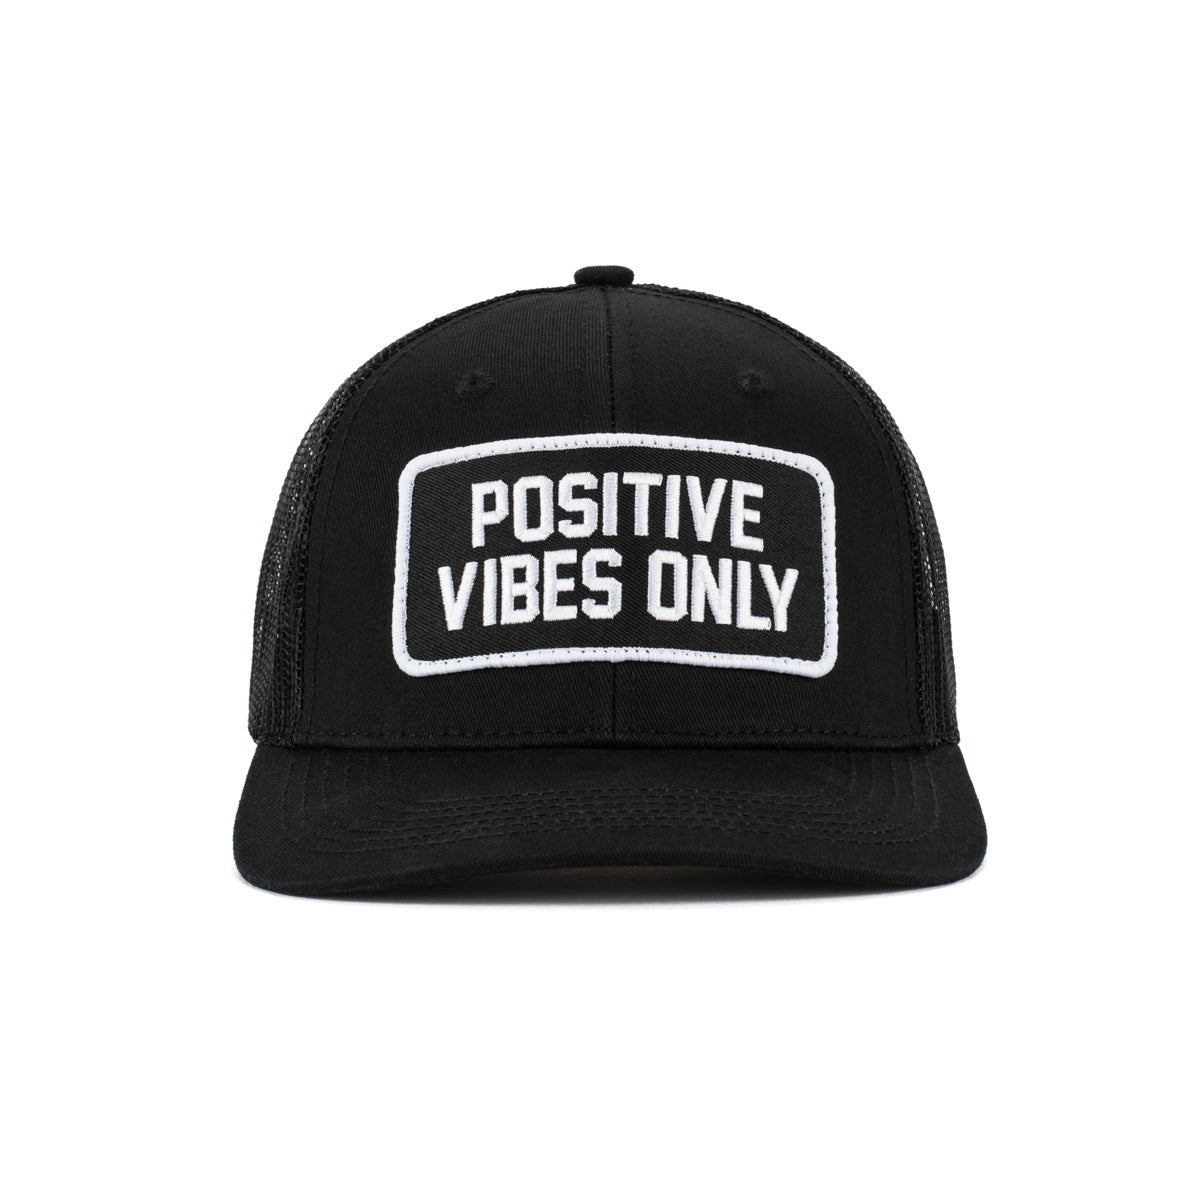 Positive Vibes Only Patch Trucker Hat-Hats-Barstool Sports-Black-One Size-Barstool Sports